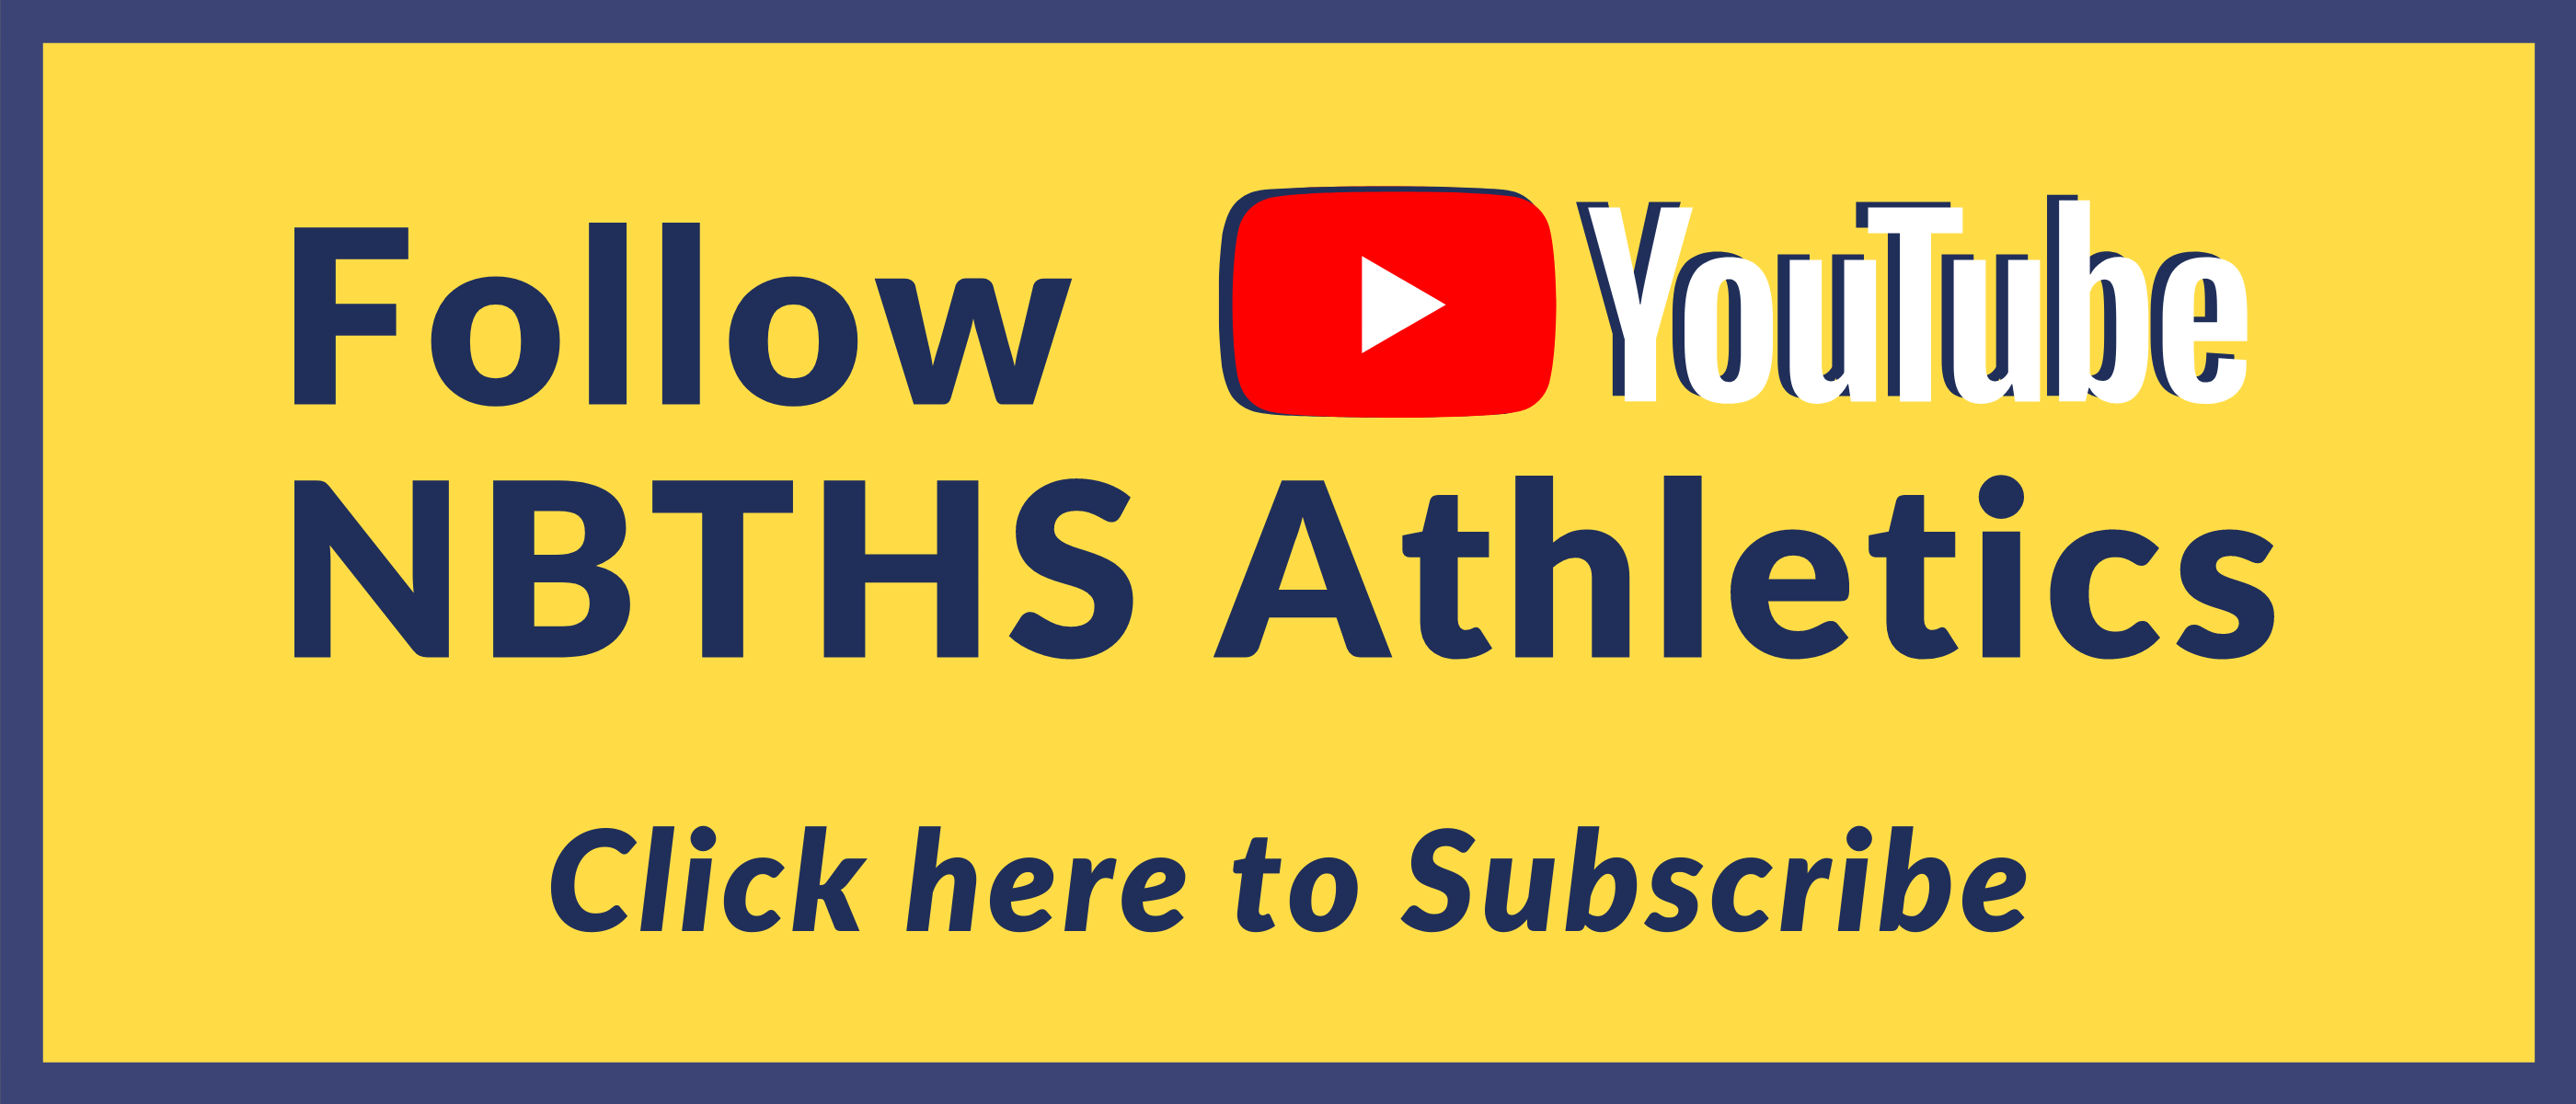 FOLLOW YOUTUVE NBTHS ATHLETICS - CLICK HERE TO SUBSCRIBE